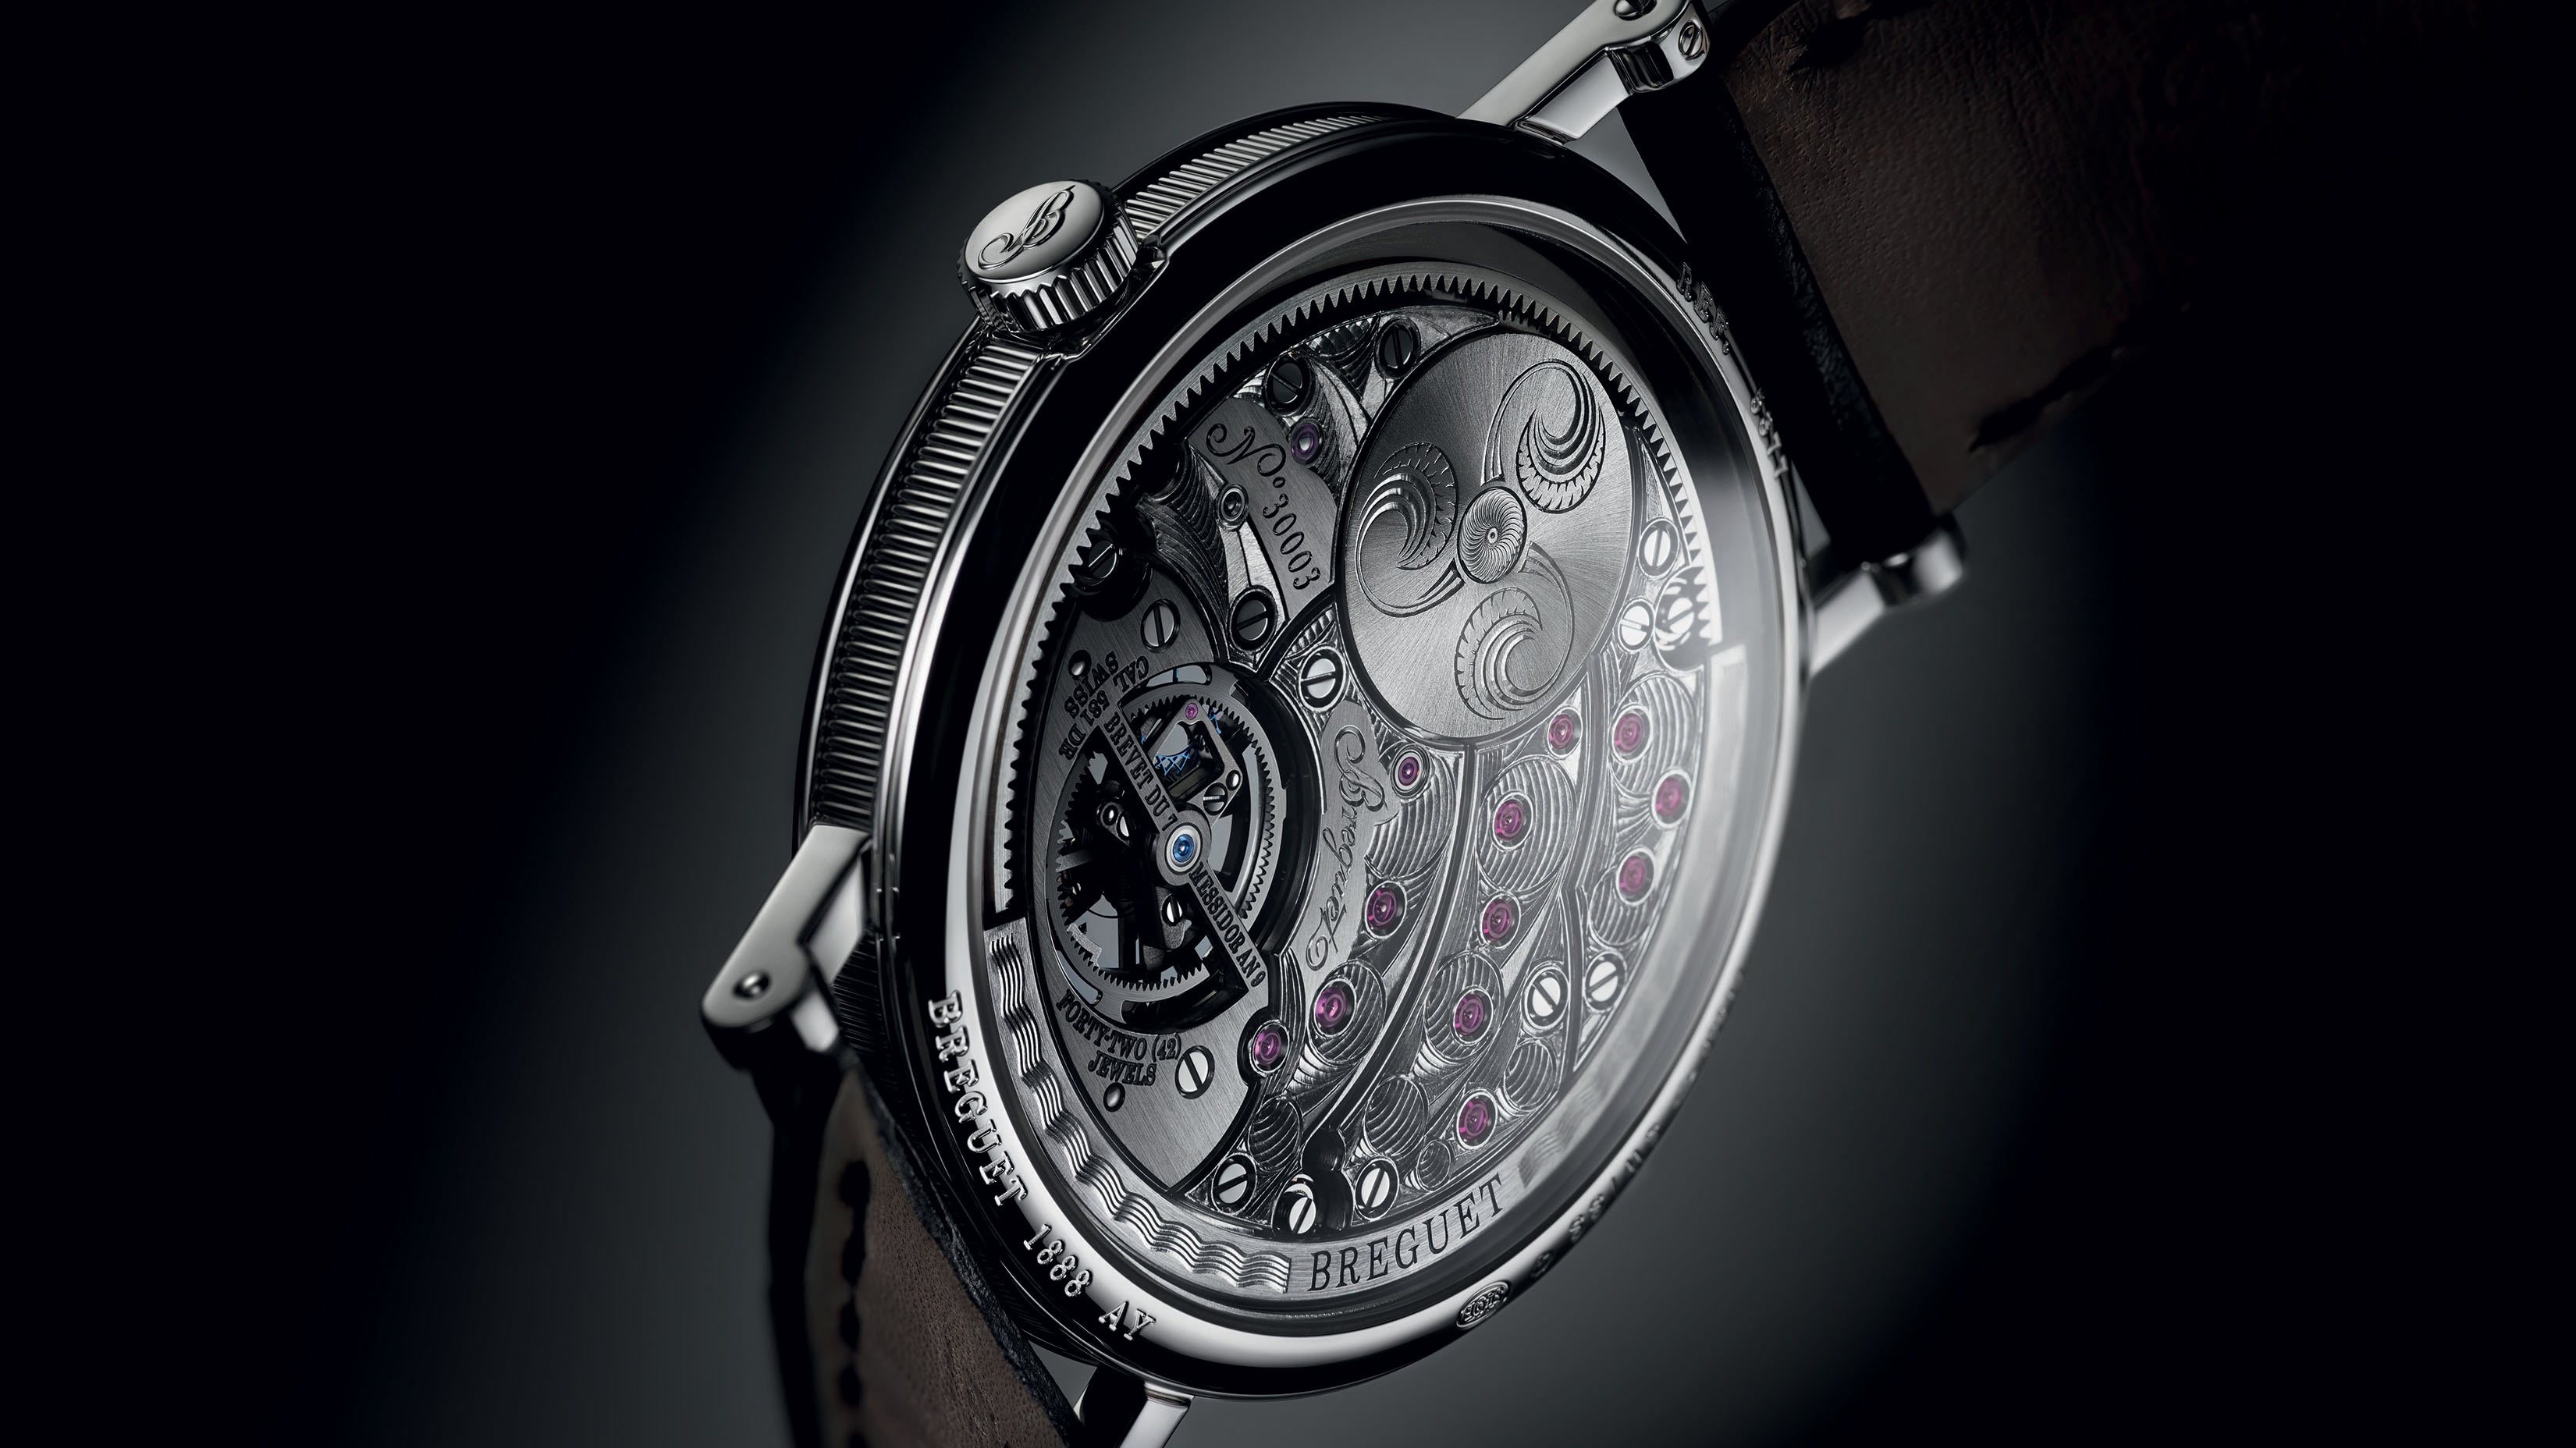 Breguet S Invention Has Been Changing The World Since 18th